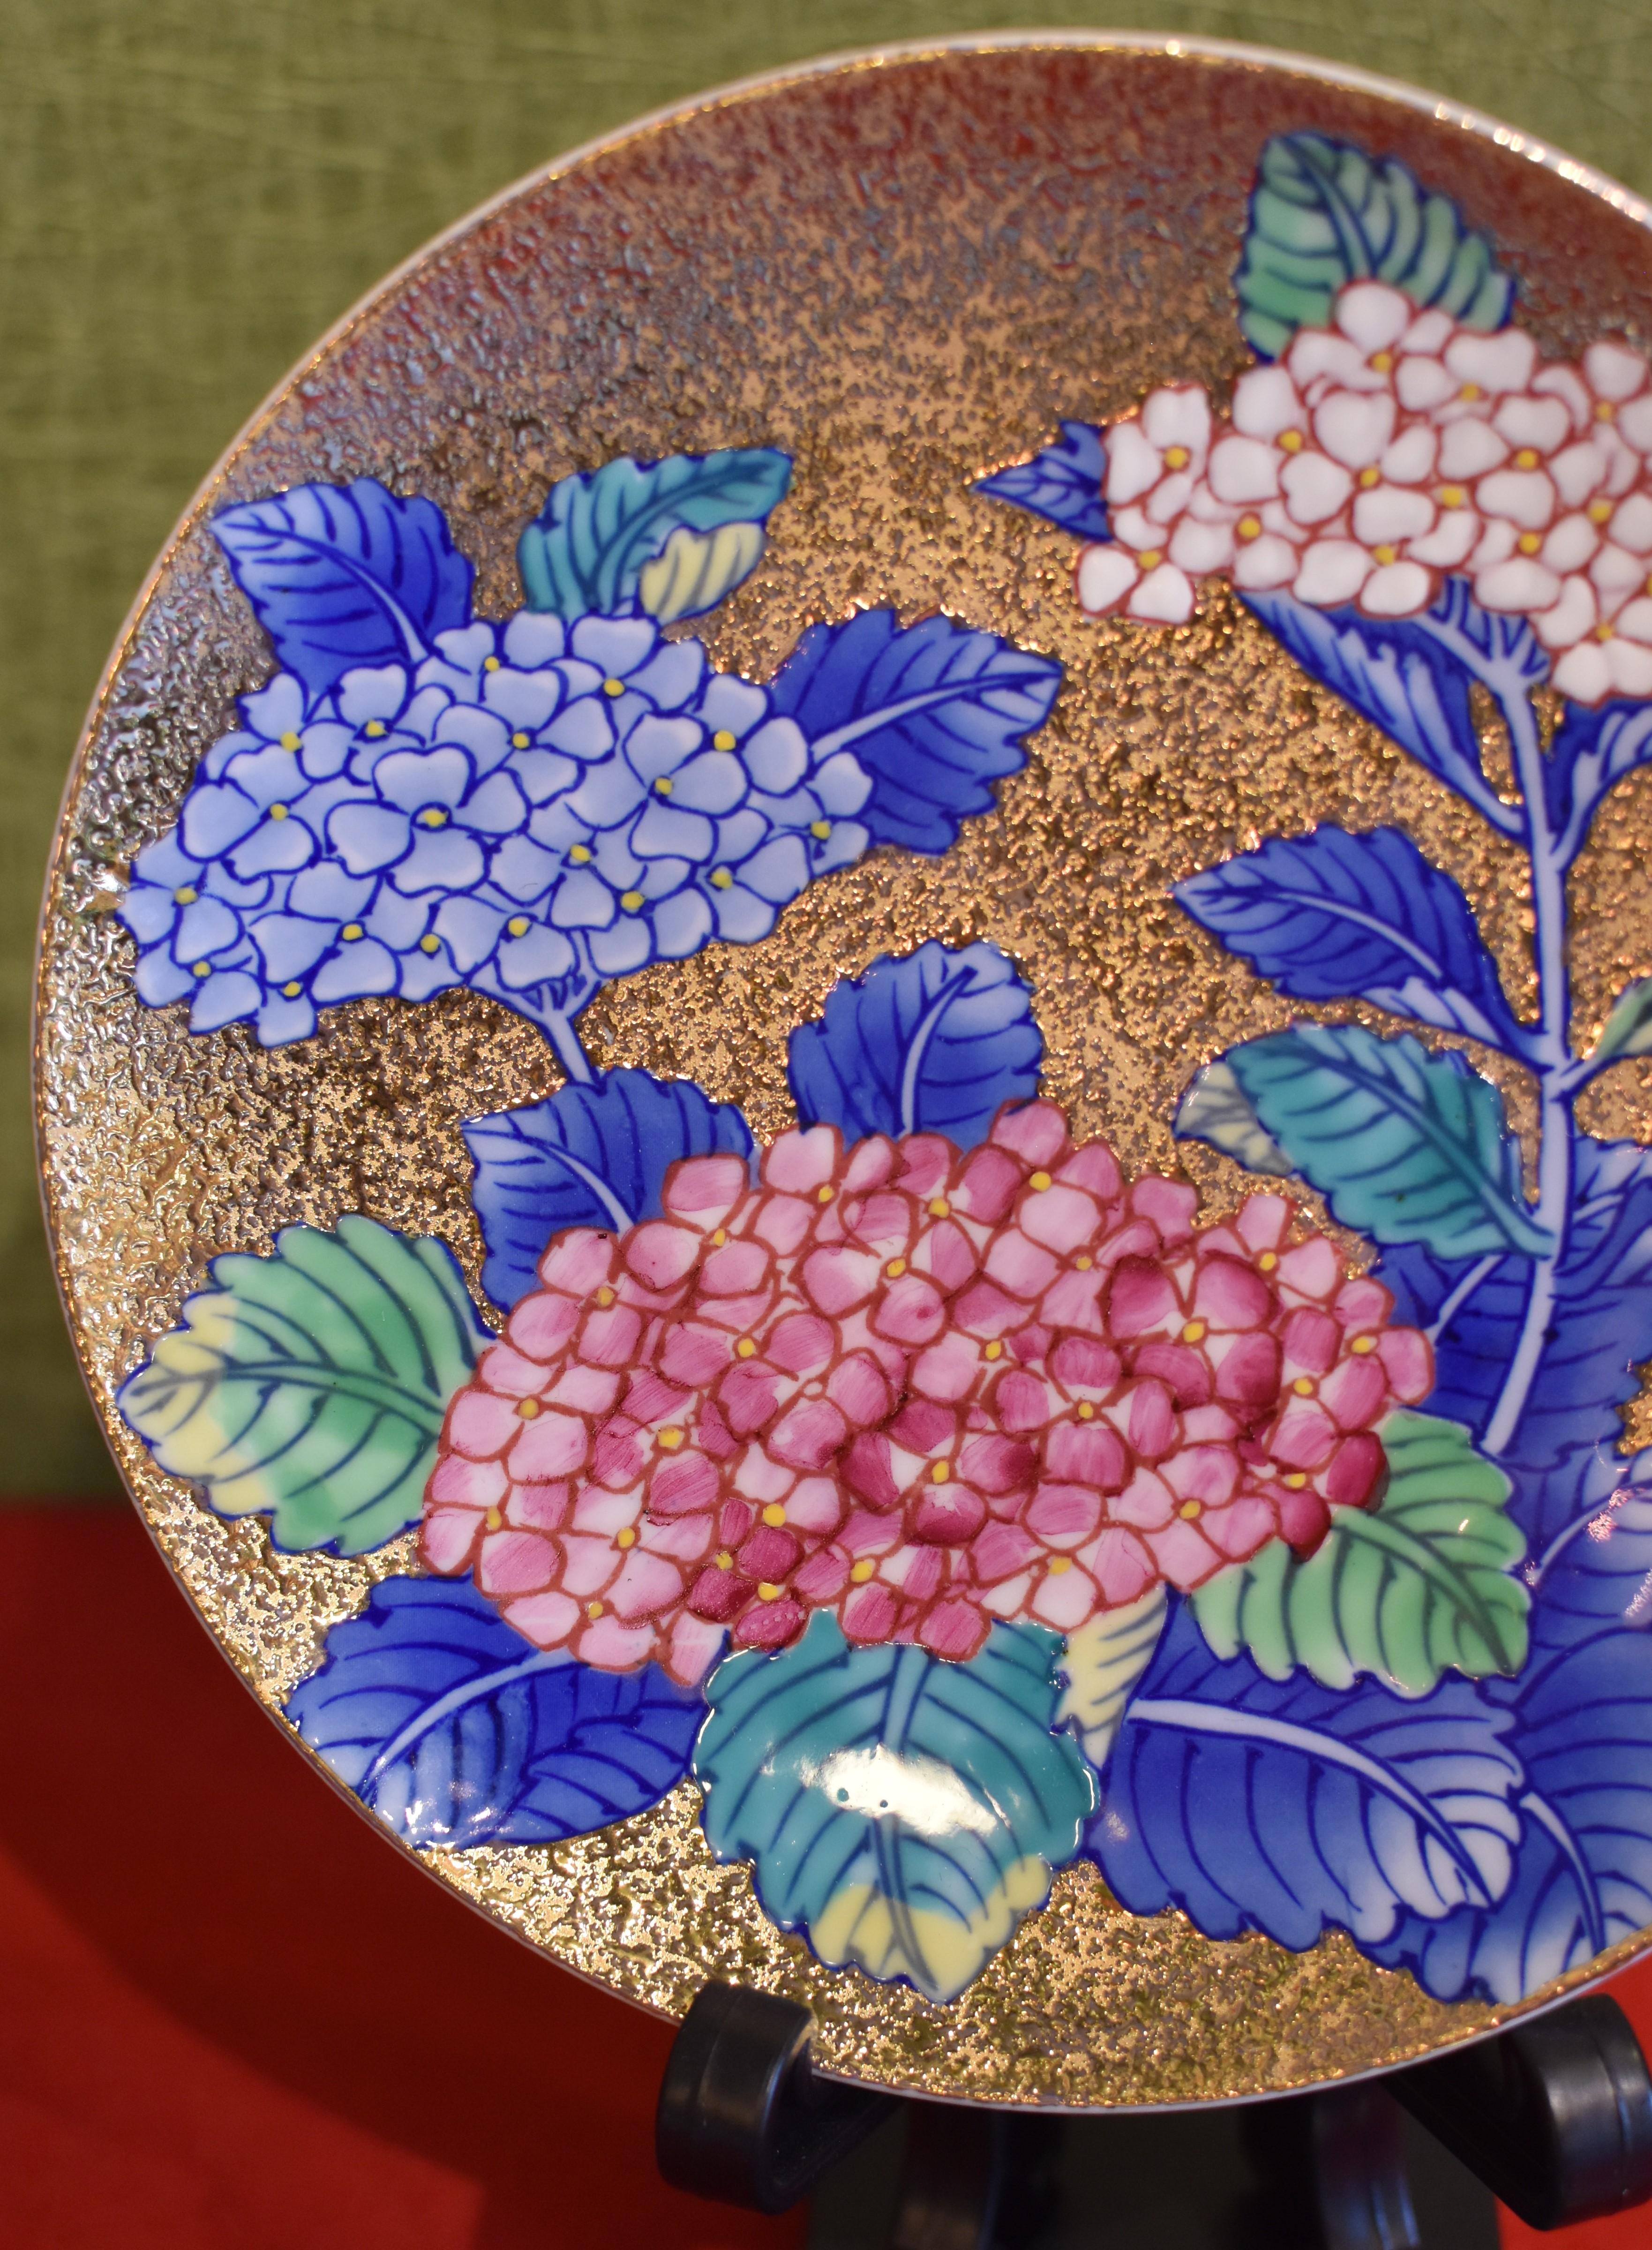 Exquisite contemporary Japanese gilded porcelain cup and saucer, intricately hand-painted in vivid blue, red and white on an attractive gilded body, featuring stunning hydrangeas in full bloom. This cup and saucer is from a signature series by a